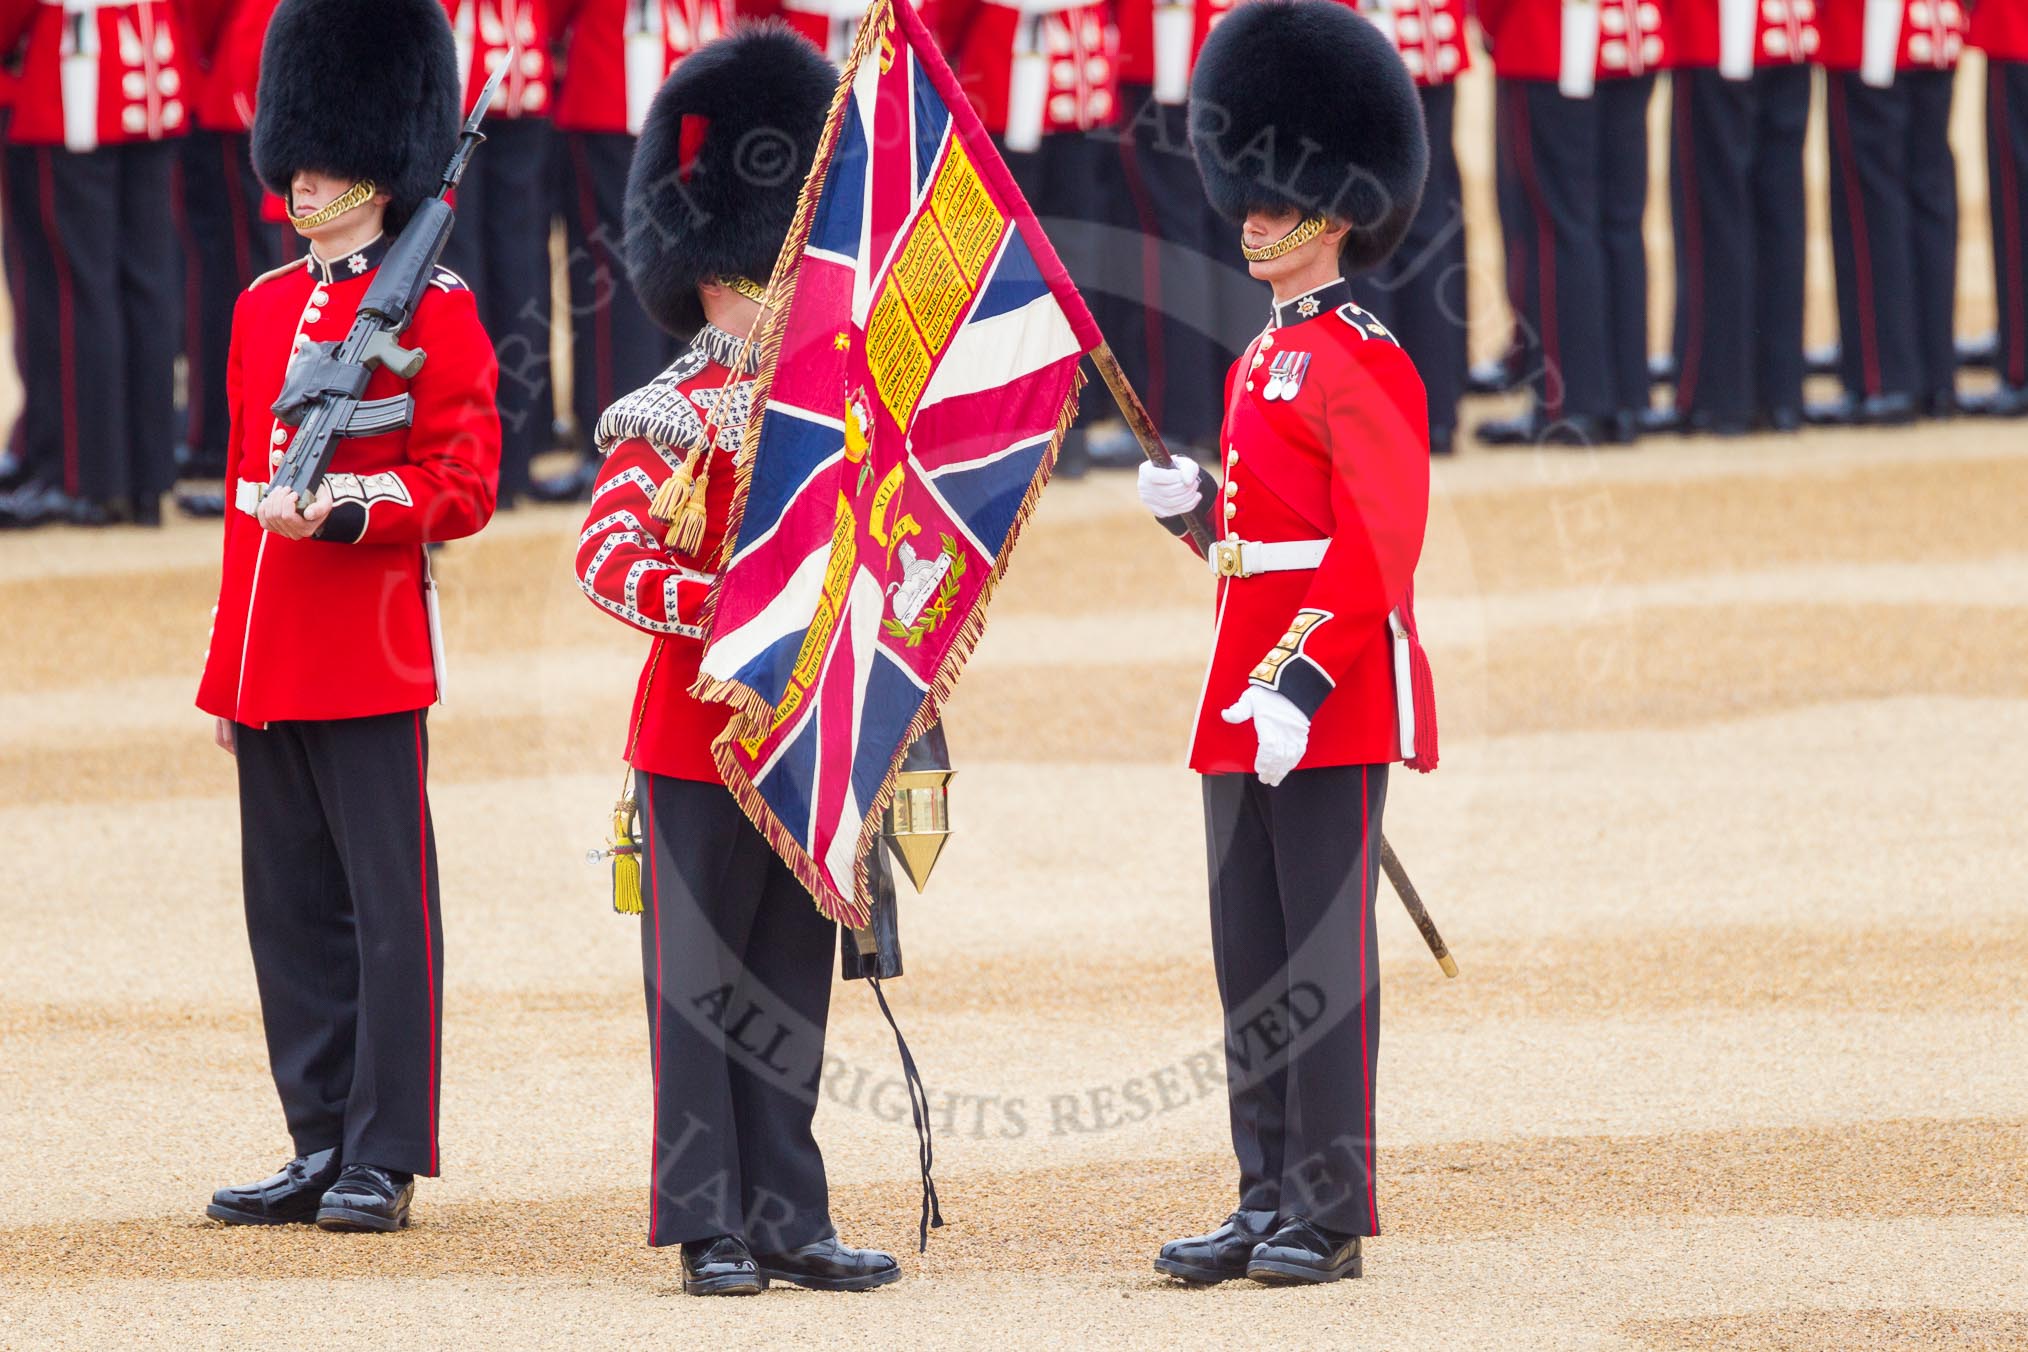 The Colonel's Review 2016.
Horse Guards Parade, Westminster,
London,

United Kingdom,
on 04 June 2016 at 10:35, image #96